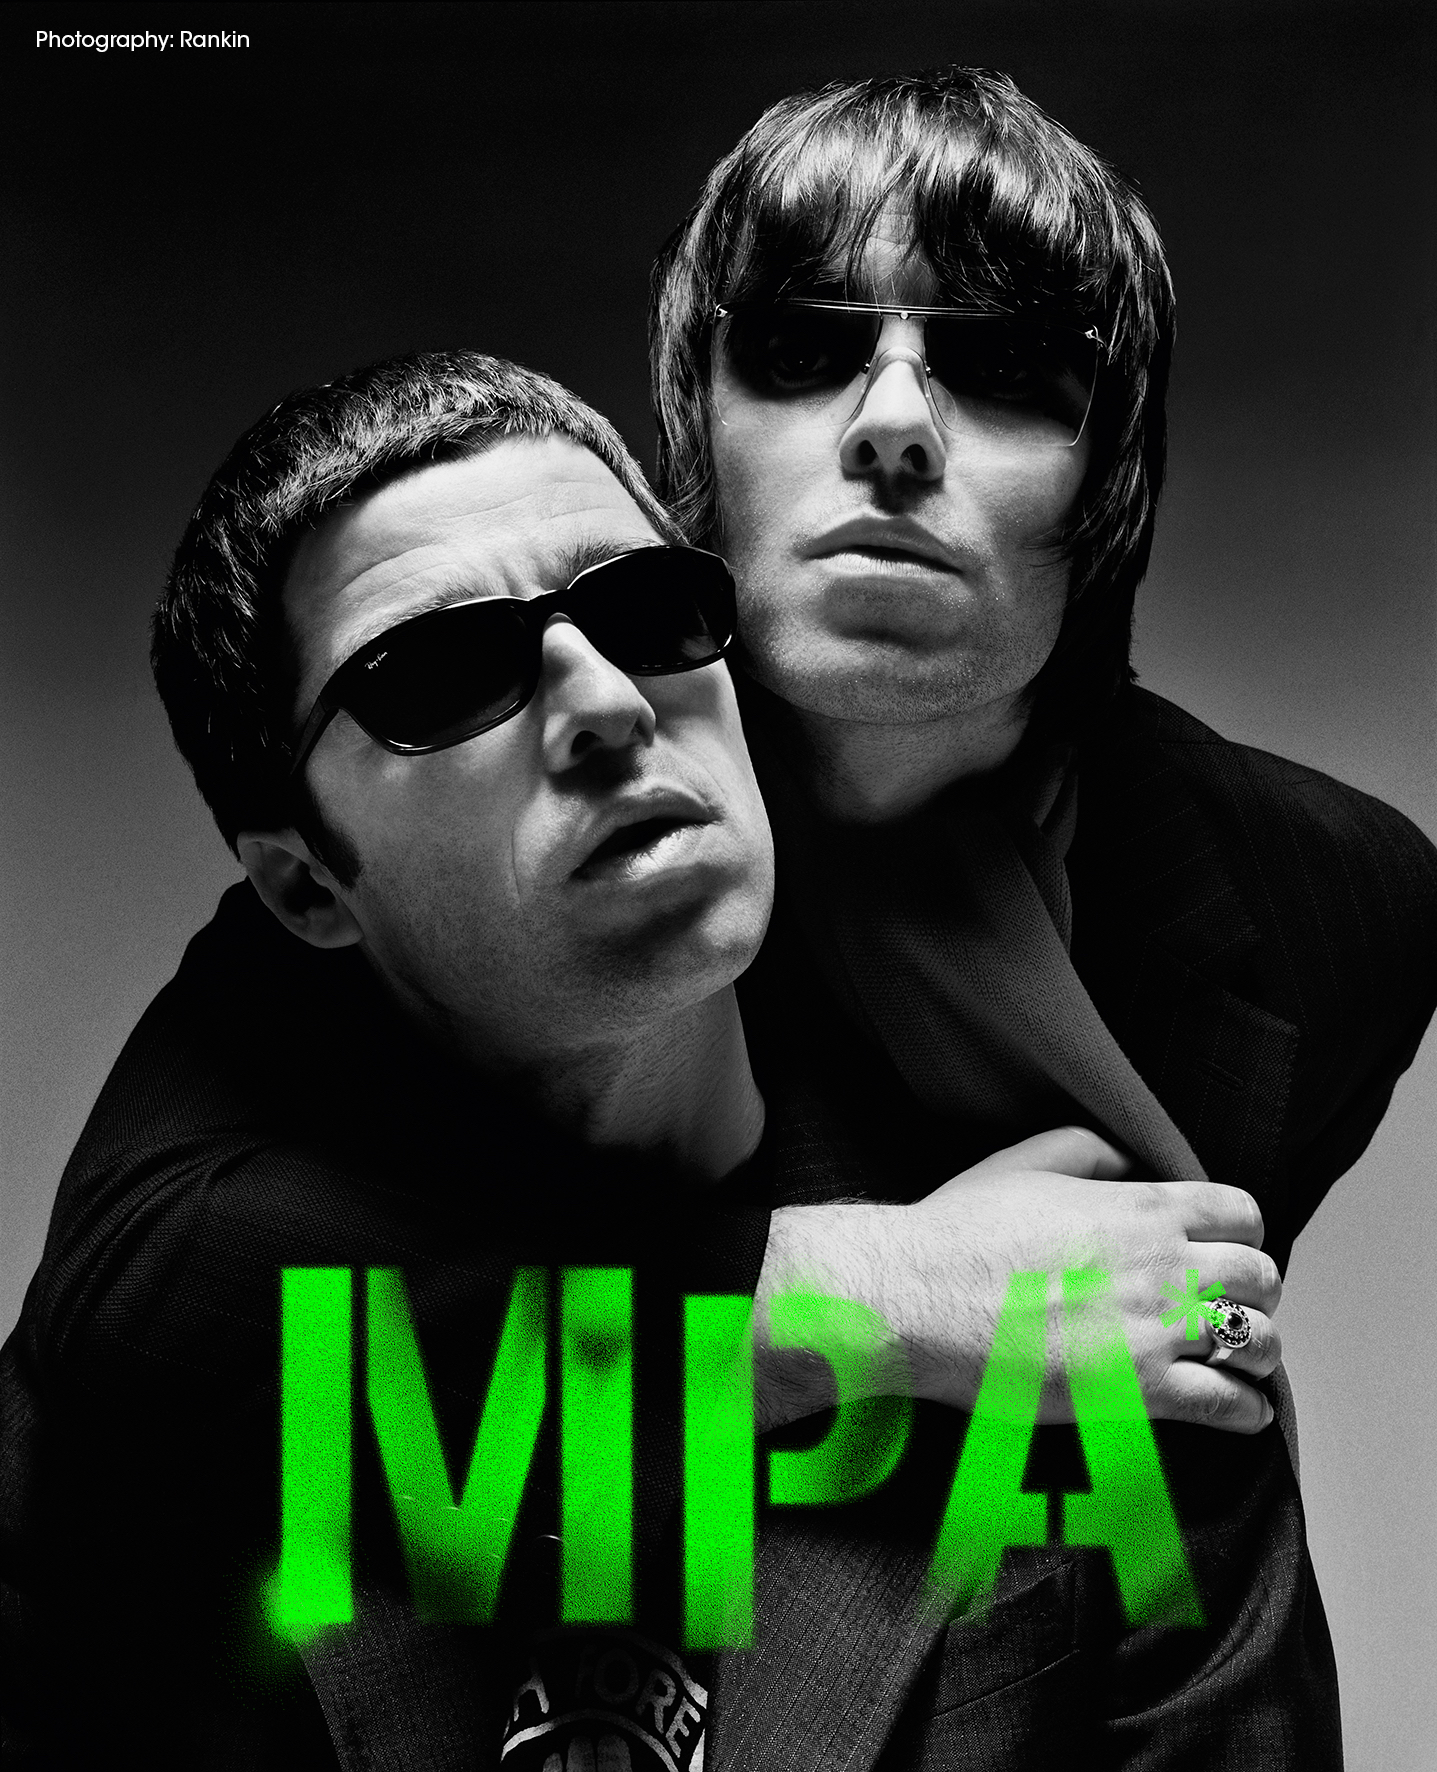 The Gallagher brothers - Noel (left) and Liam (right), formerly of Oasis. Image: Rankin 